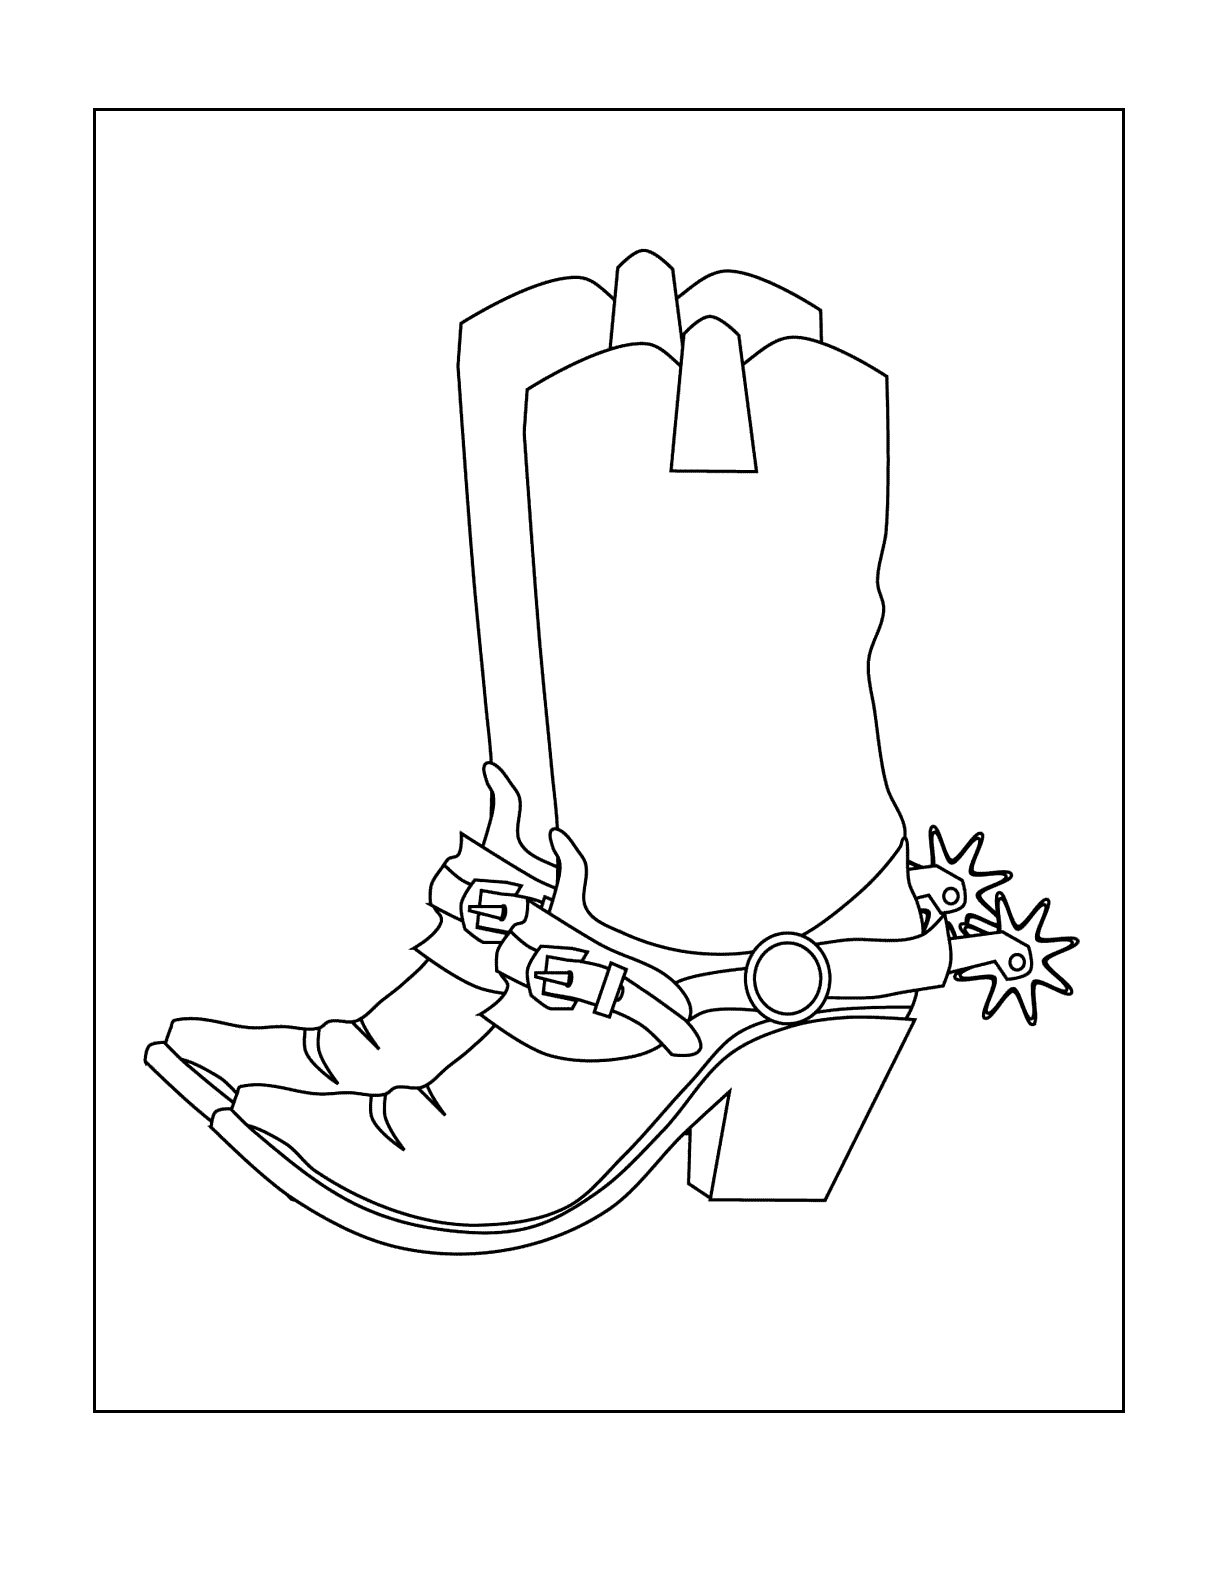 Cowboy Boots With Spurs Coloring Page